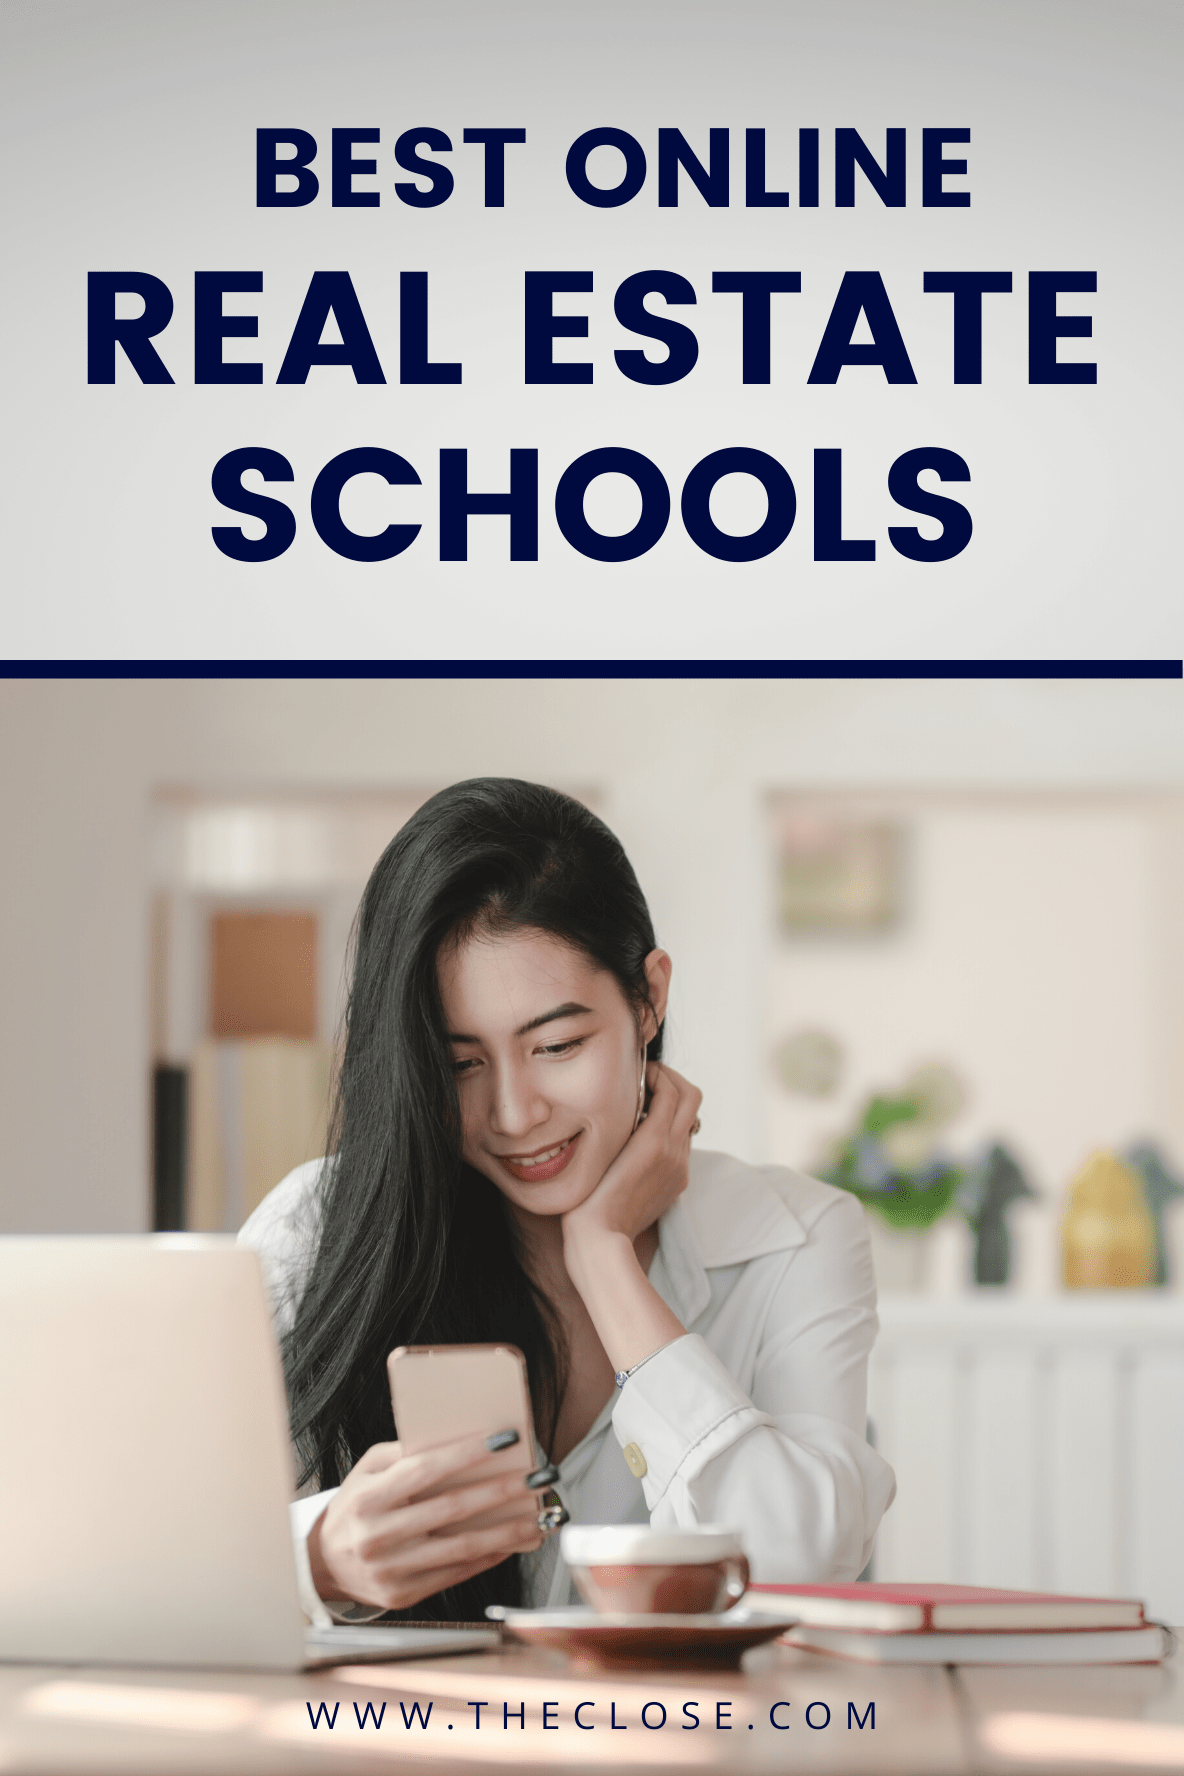 How much for real estate classes